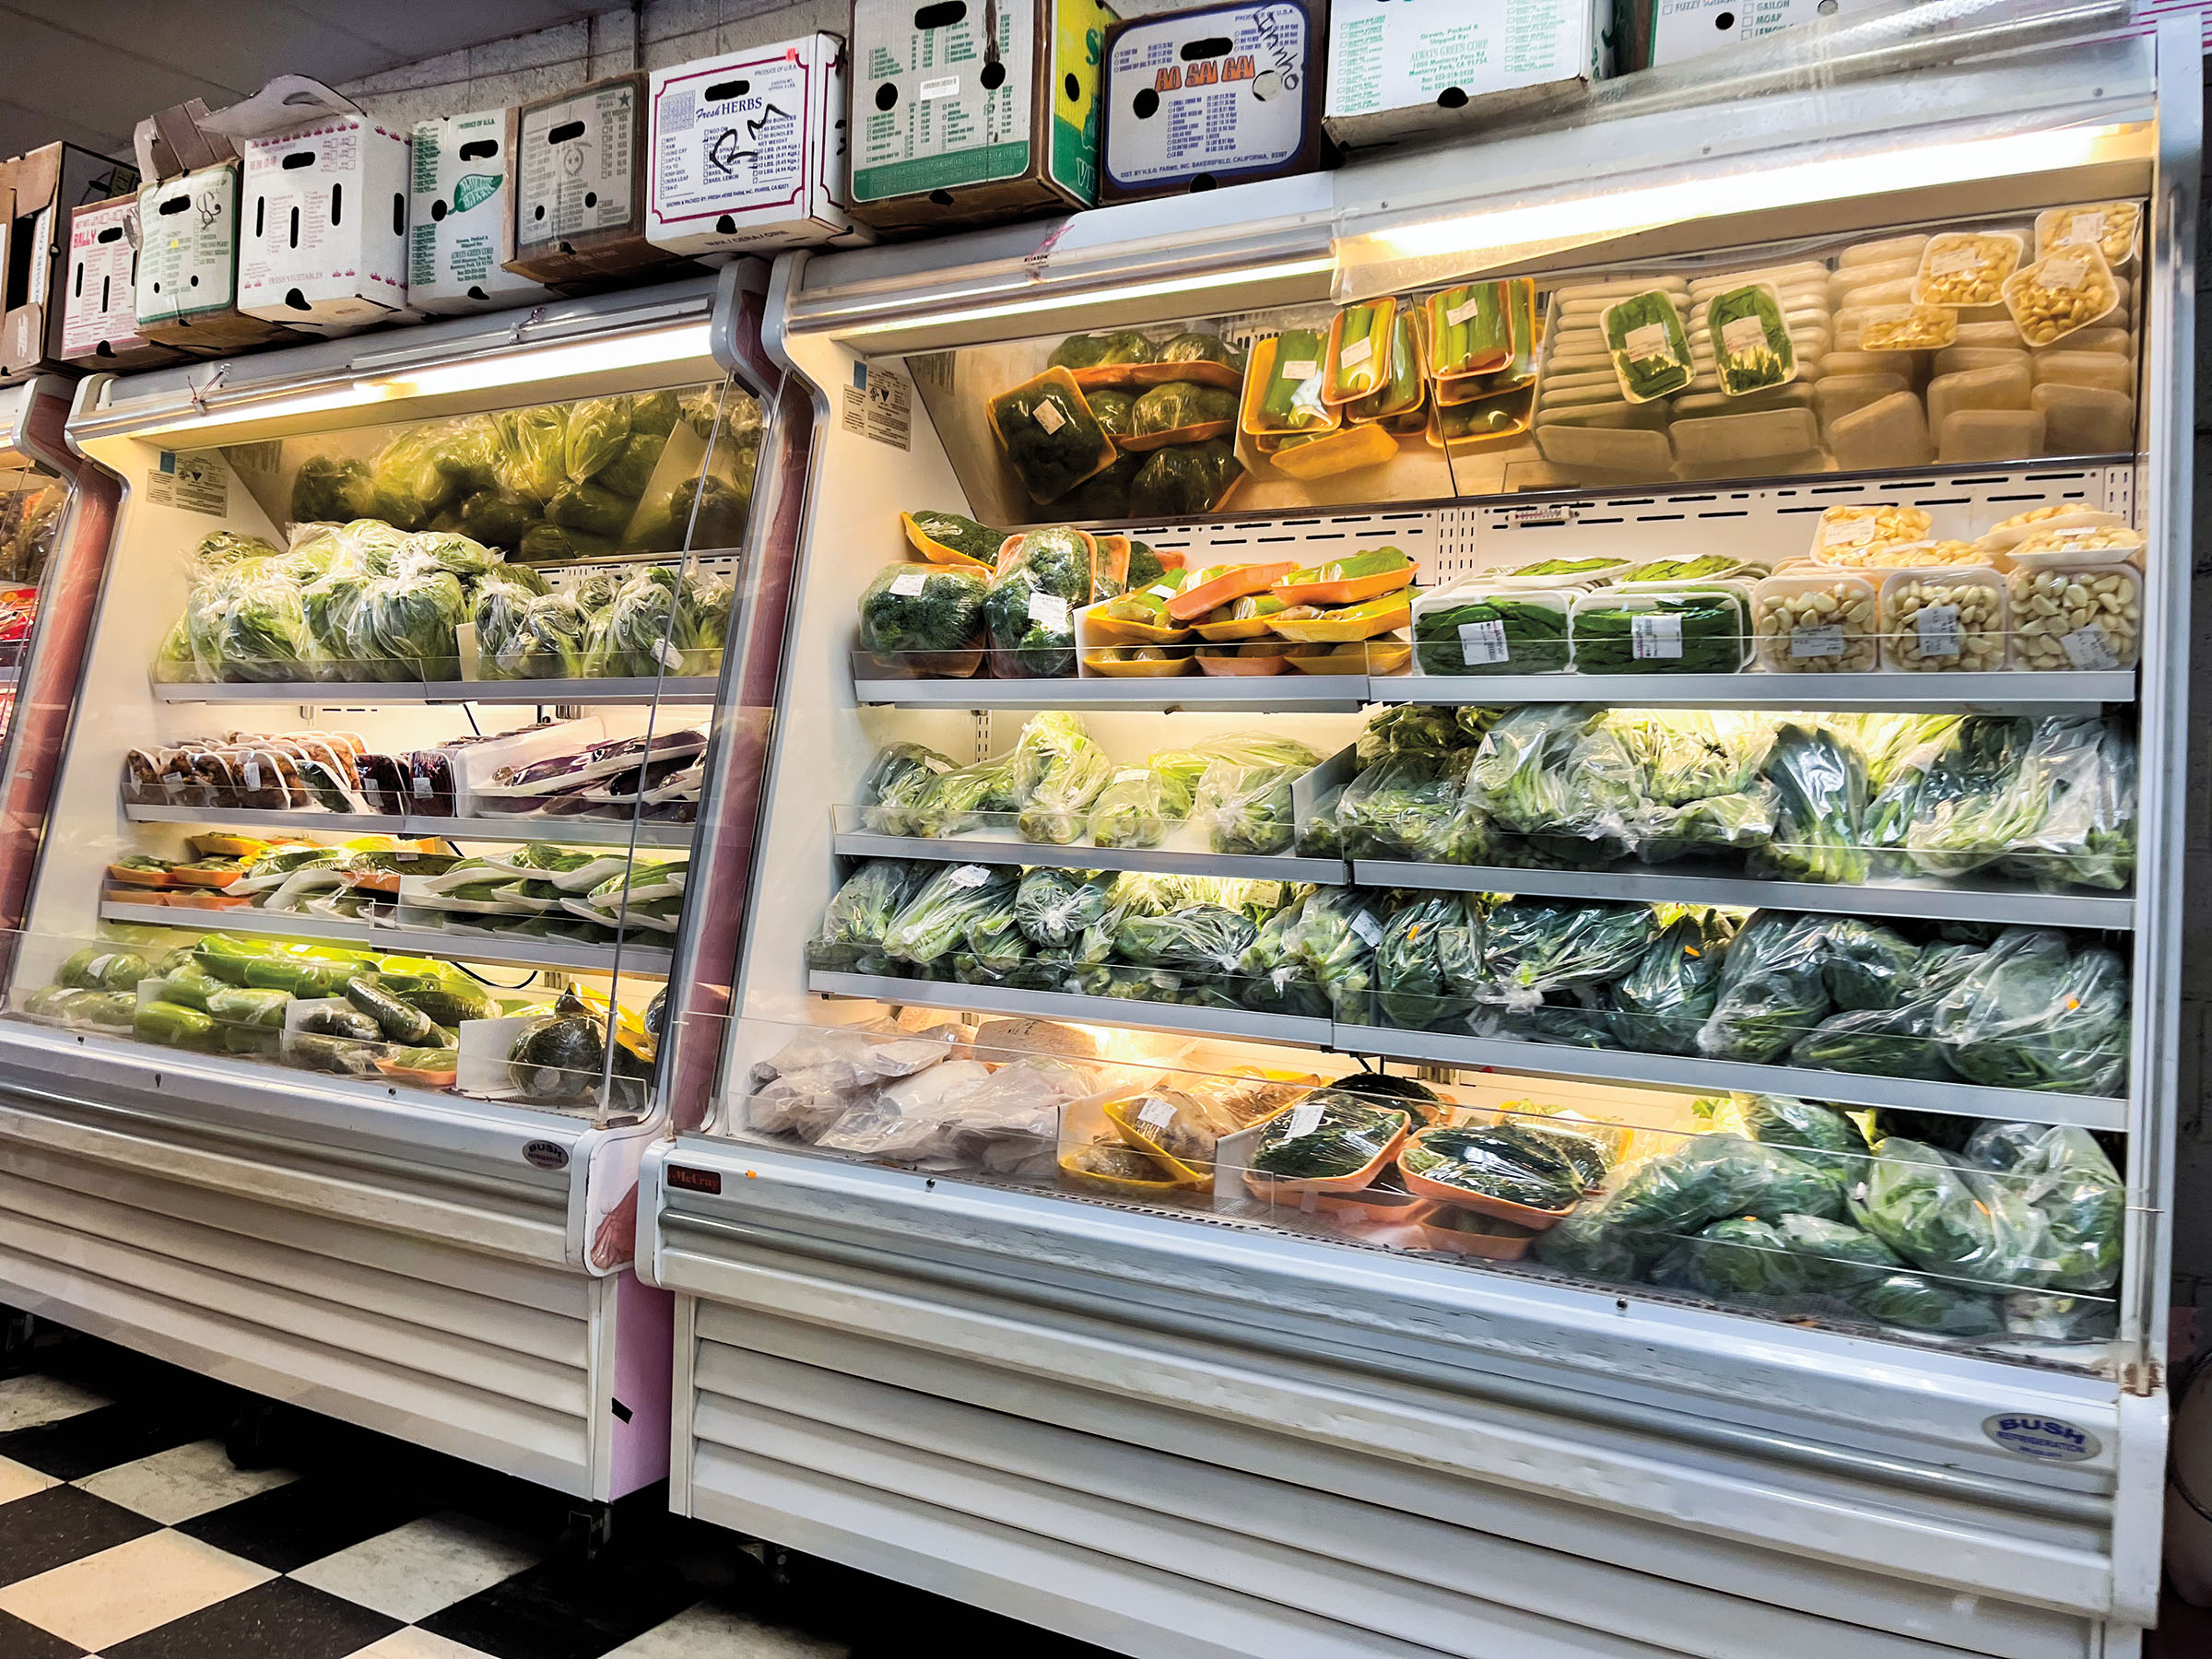 A store cold case filled with a variety of vegetables under bright lights